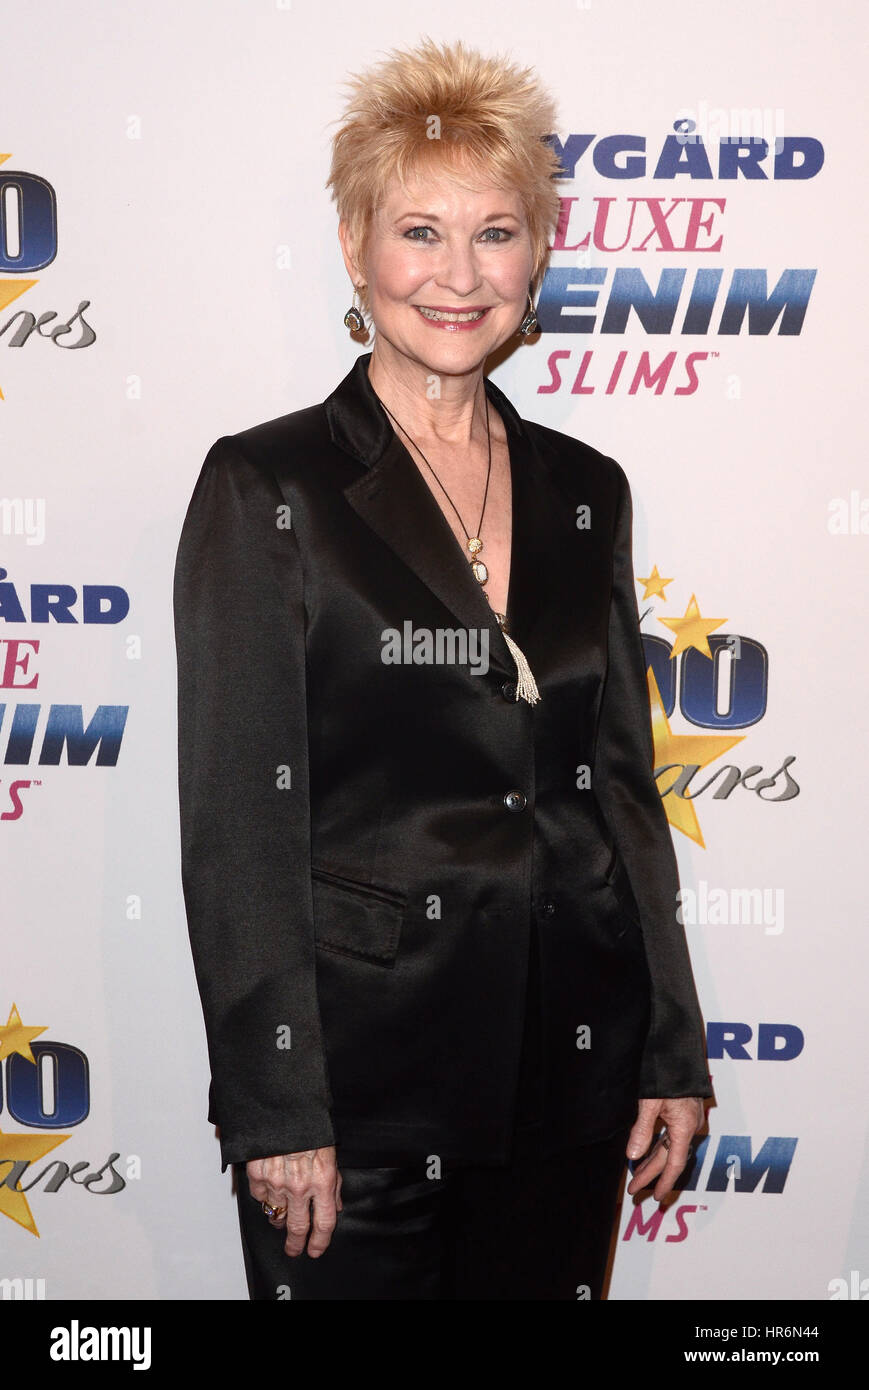 Beverly Hills, California, USA. 26th Feb, 2017. Dee Wallace Stone at the 27th Annual Night of 100 Stars Oscar Viewing Gala at the Beverly Hilton Hotel in Beverly Hills, California on February 26, 2017. Credit: David Edwards/Media Punch/Alamy Live News Stock Photo